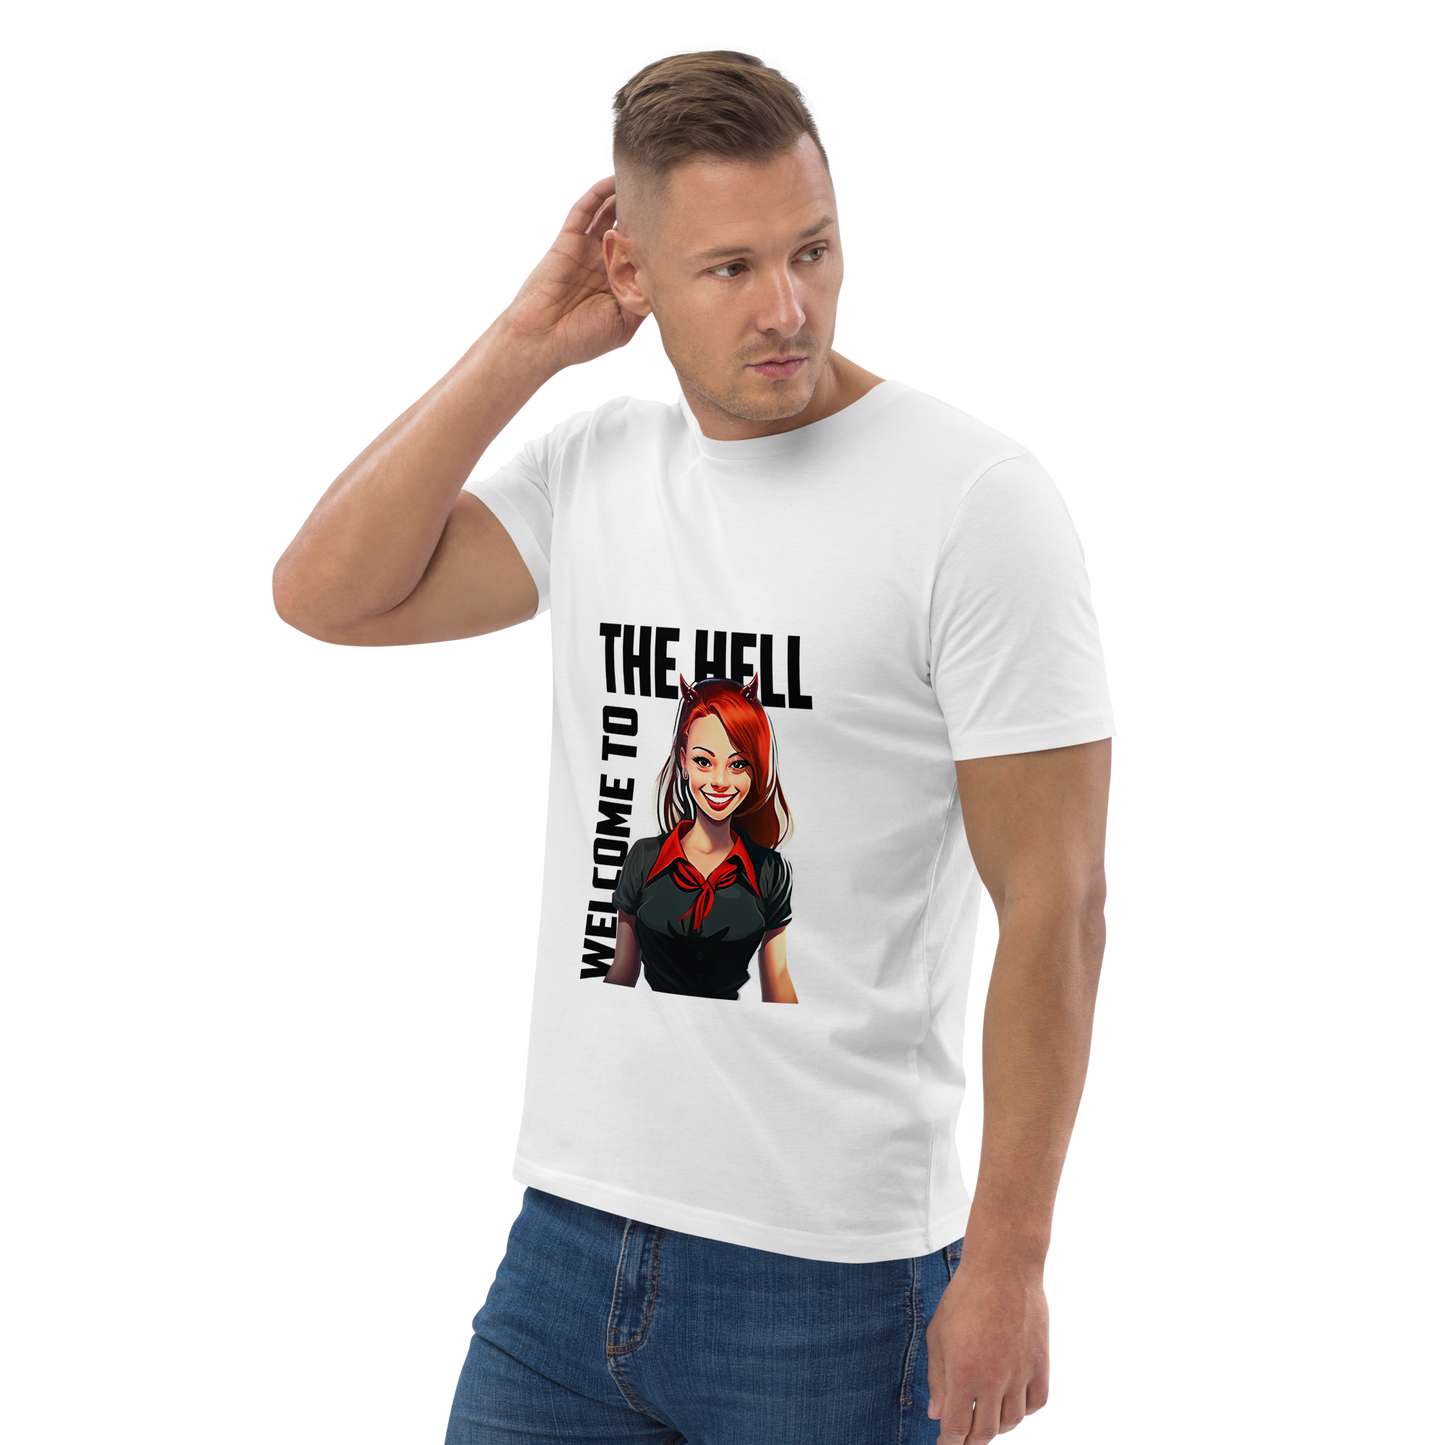 "Welcome to the Hell" Unisex organic cotton t-shirt